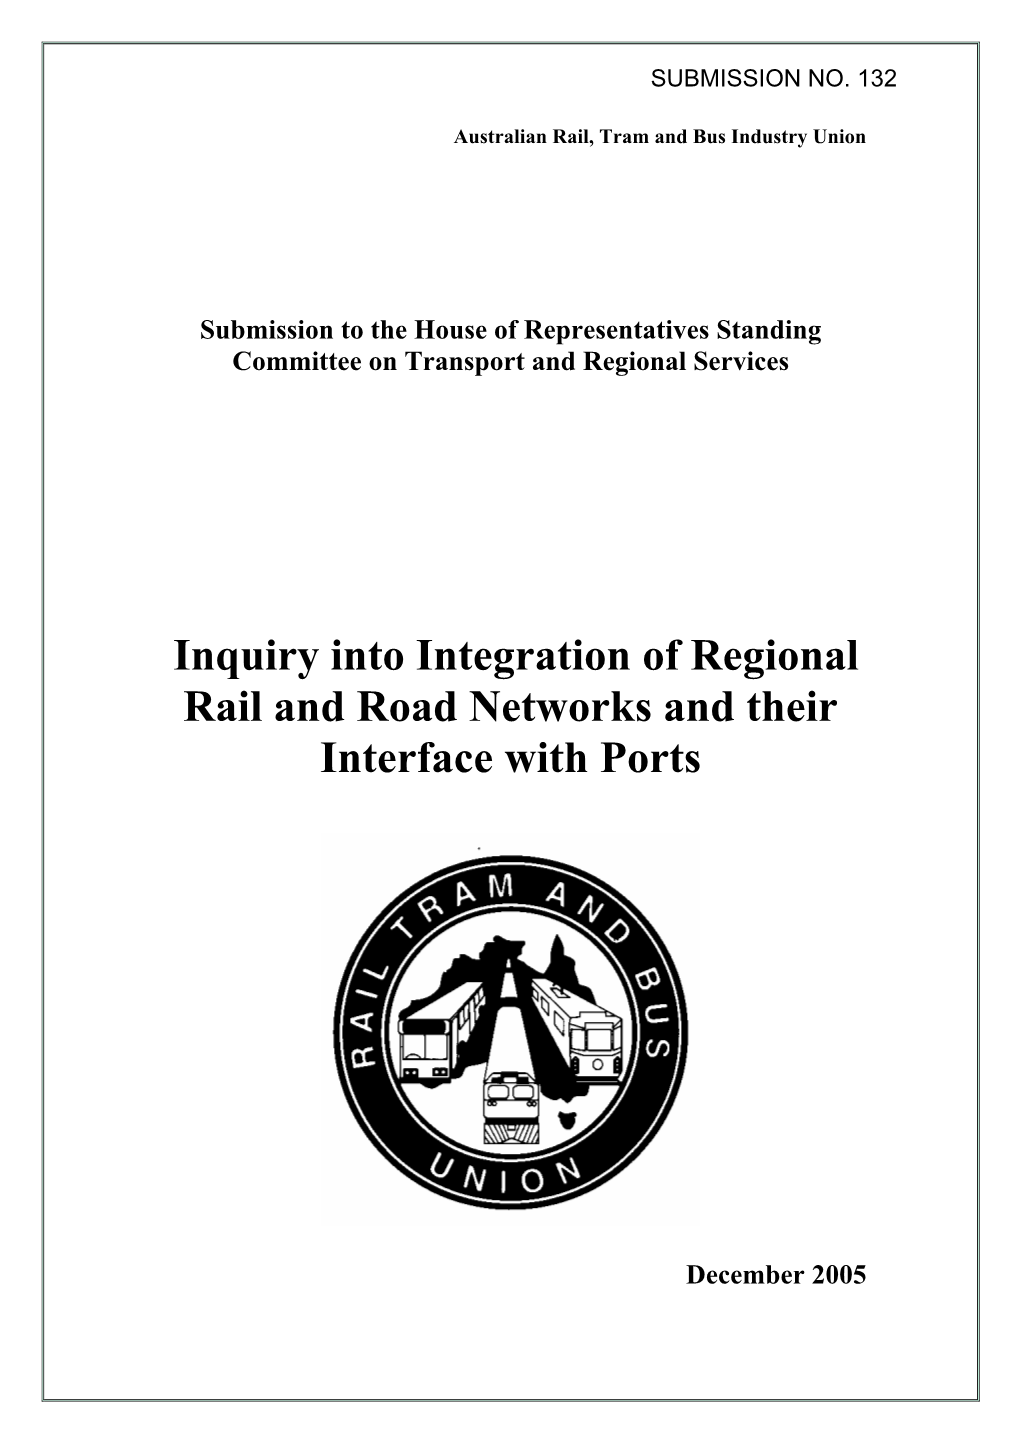 Road Rail and Ports Inquiry